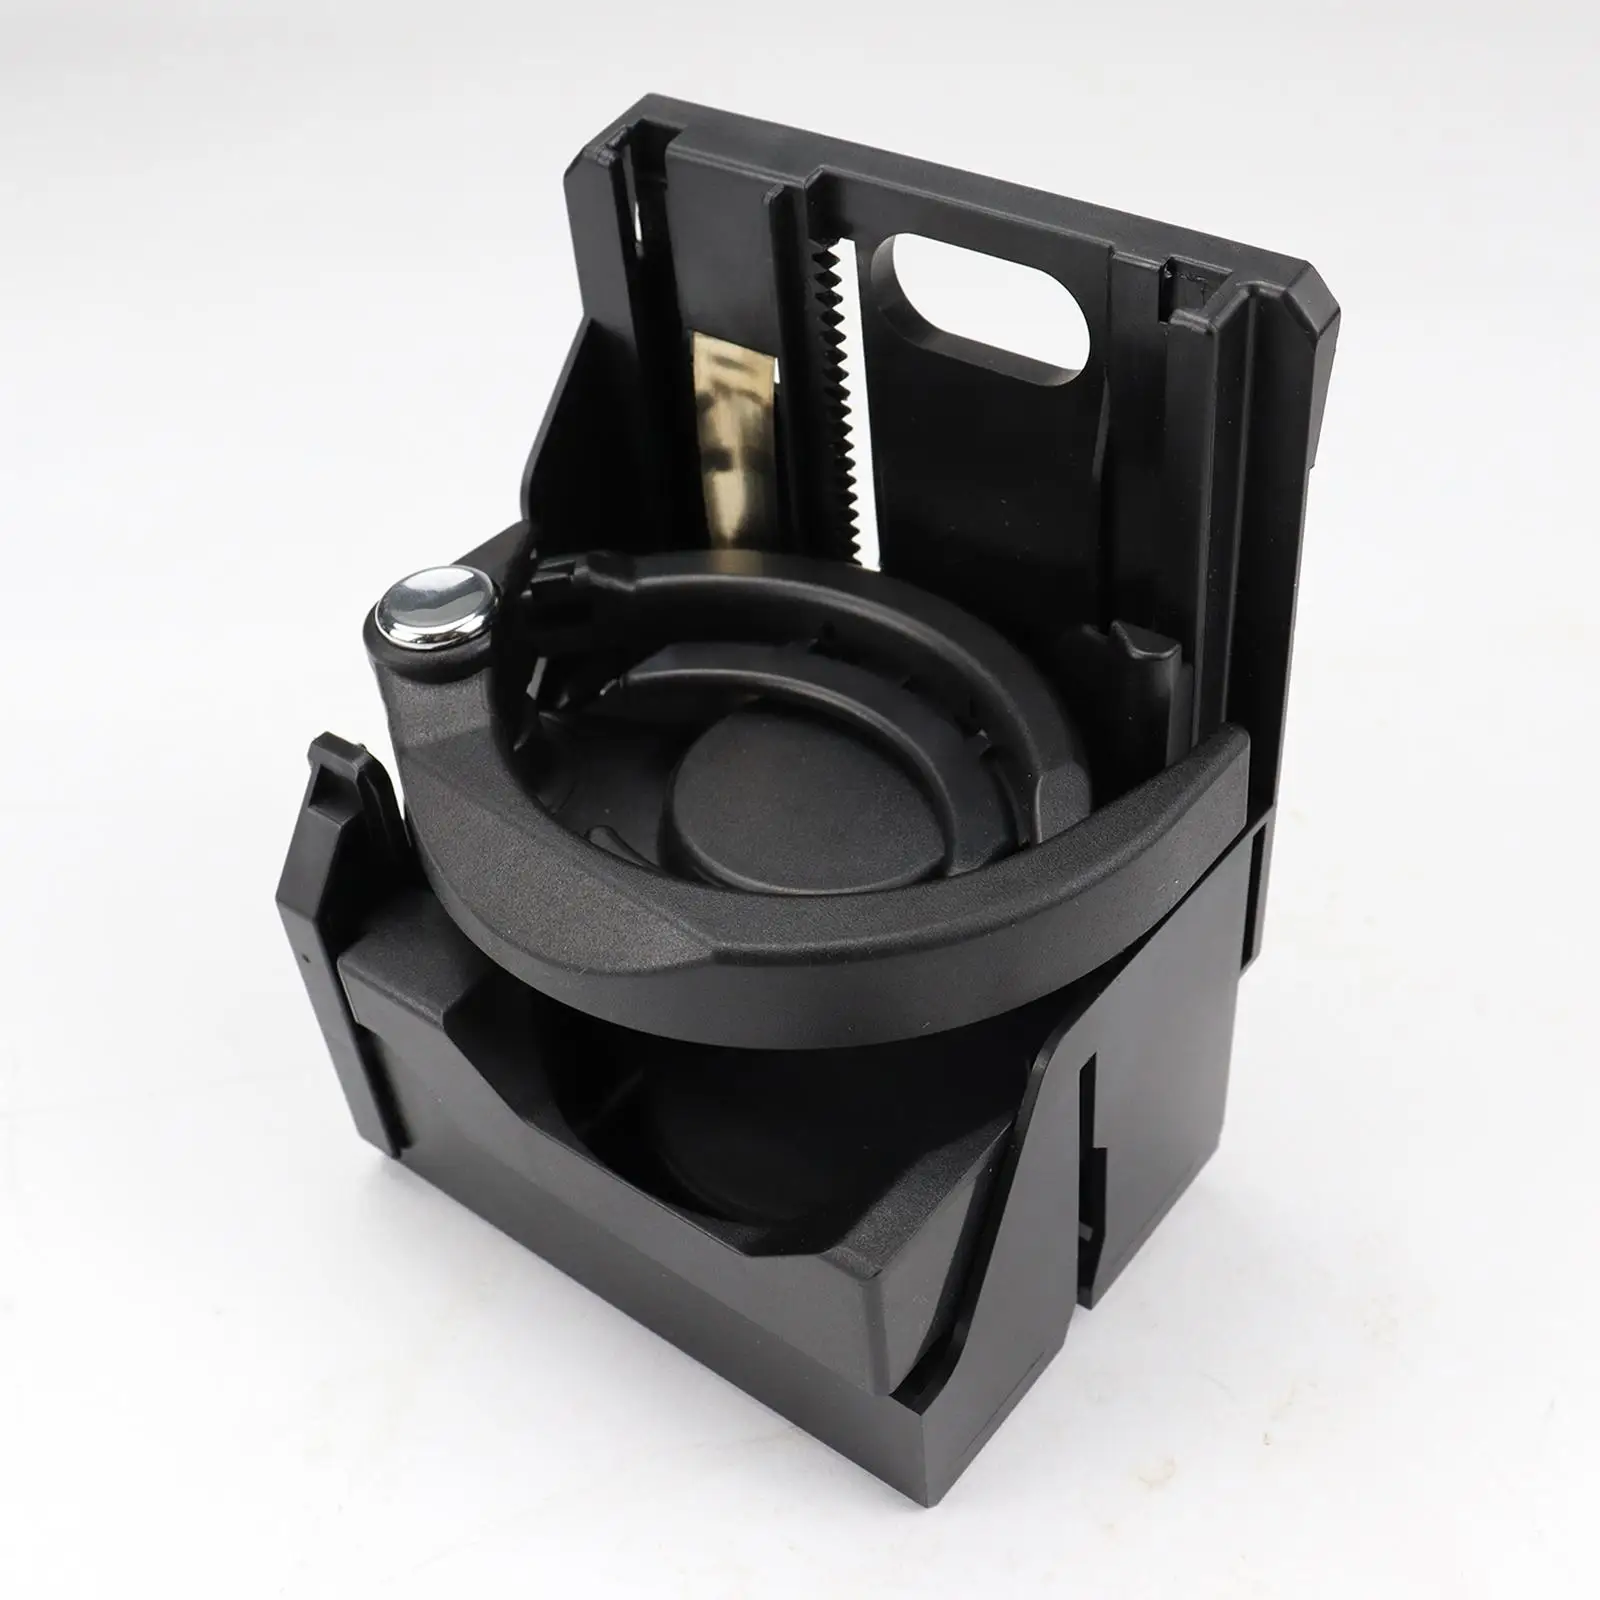 66920101 Organizers 210 680 01 14 6 6 92 0101 Storage Cup Holder 2106800114 Fit for W210 Interior Parts Car Parts